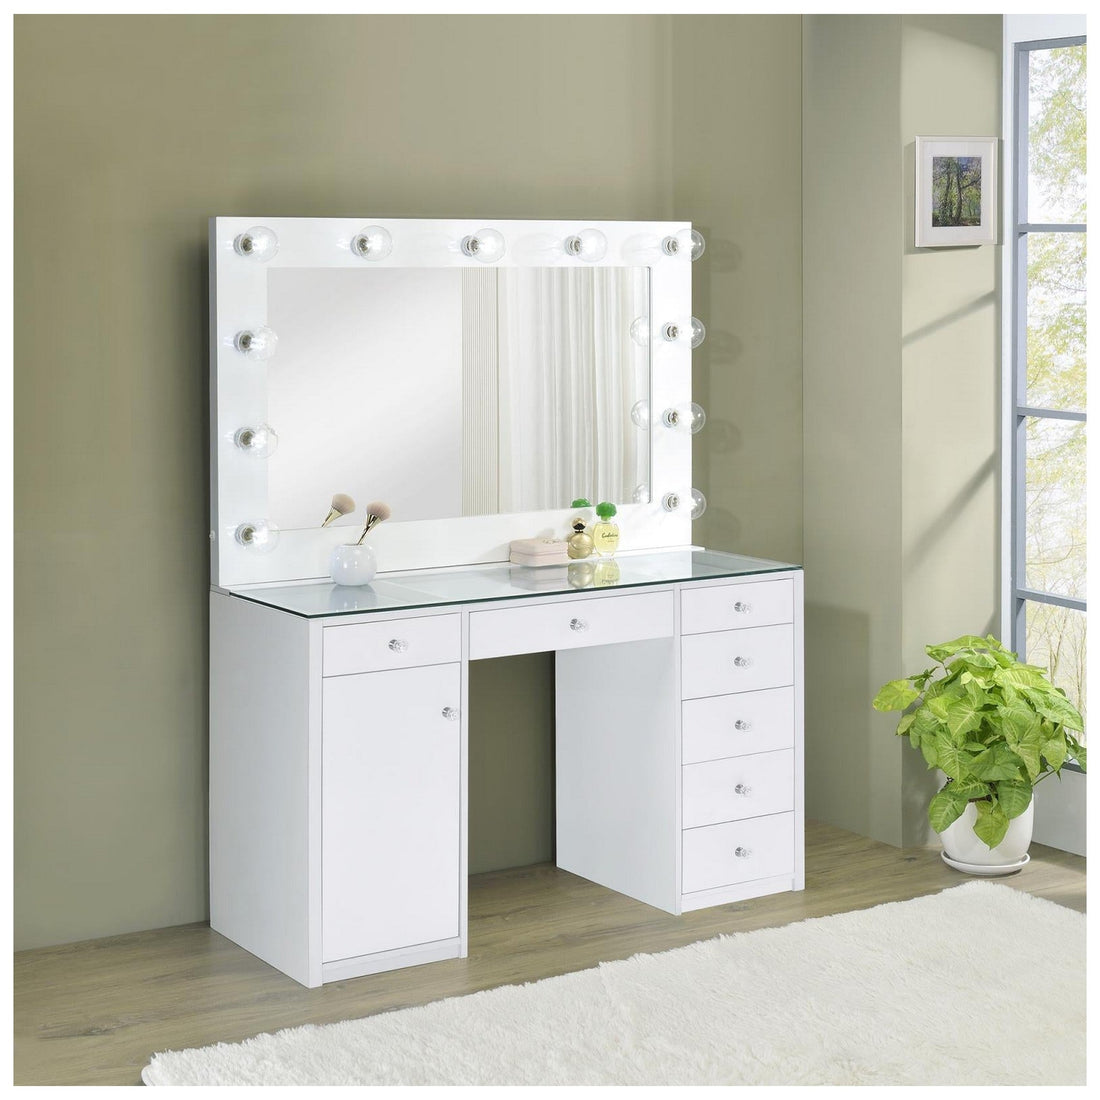 Percy 7-drawer Glass Top Vanity Desk with Lighting White 931143